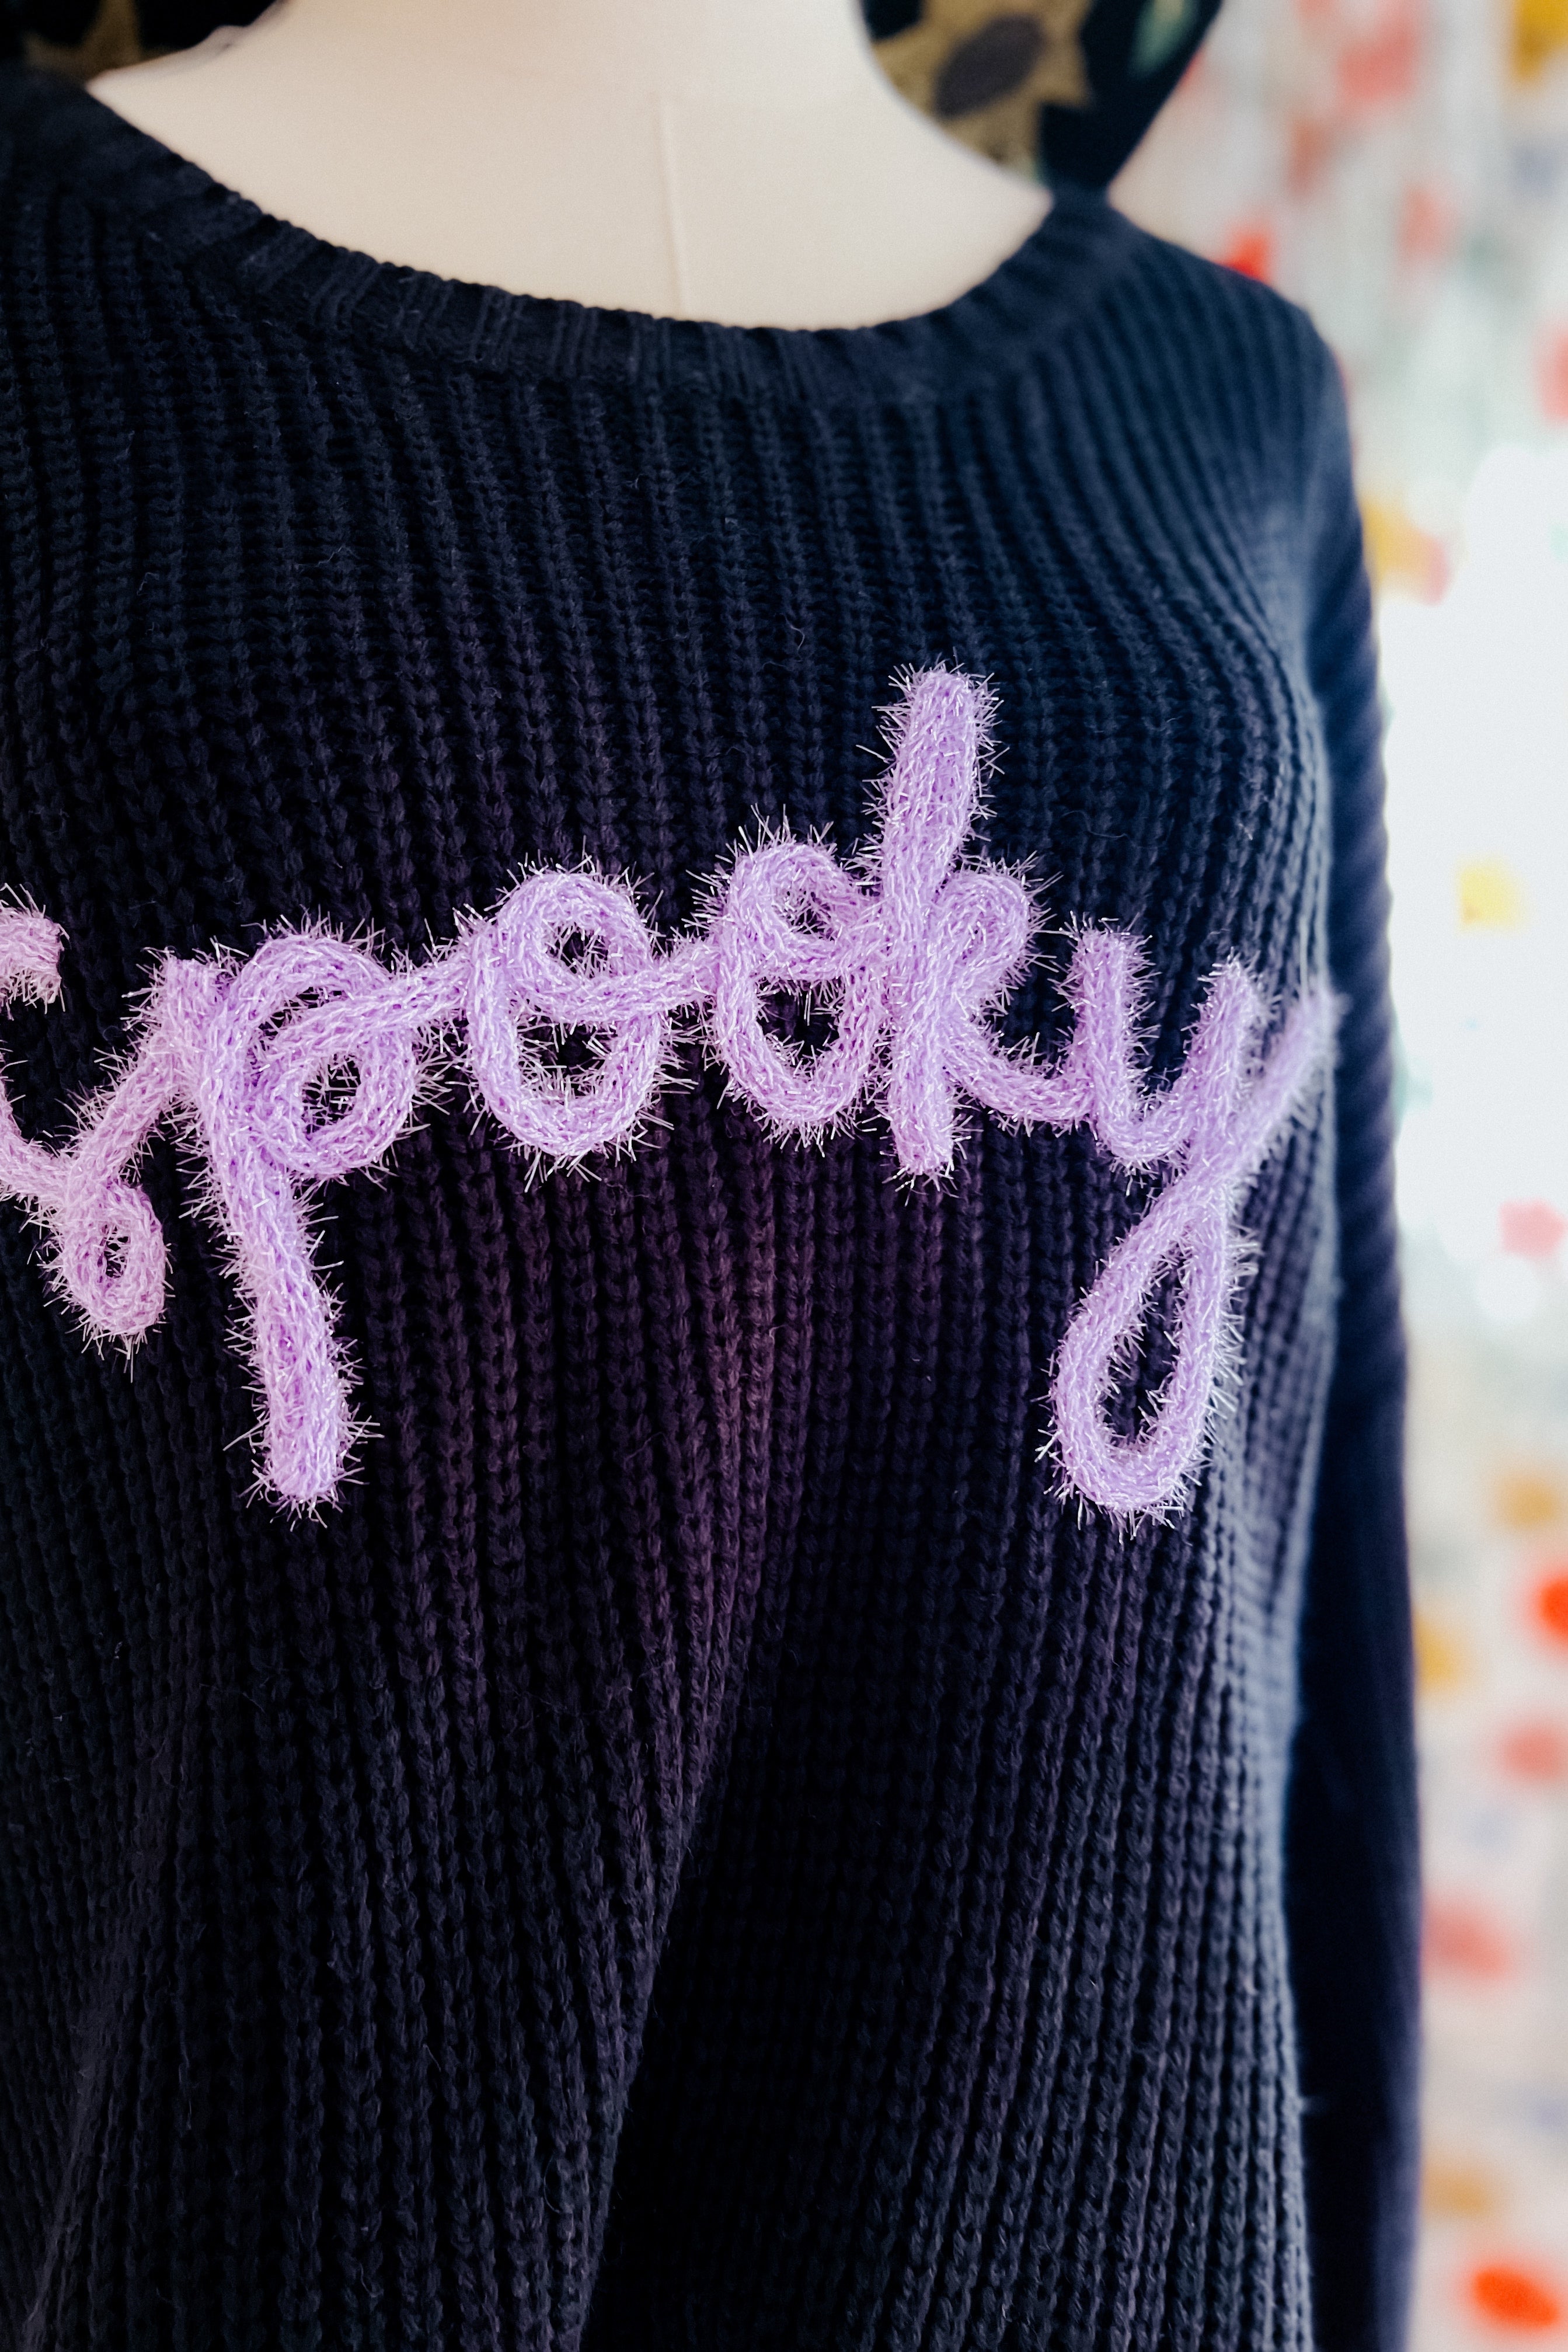 All Eyes On Me Embroidered "Spooky” Sweater